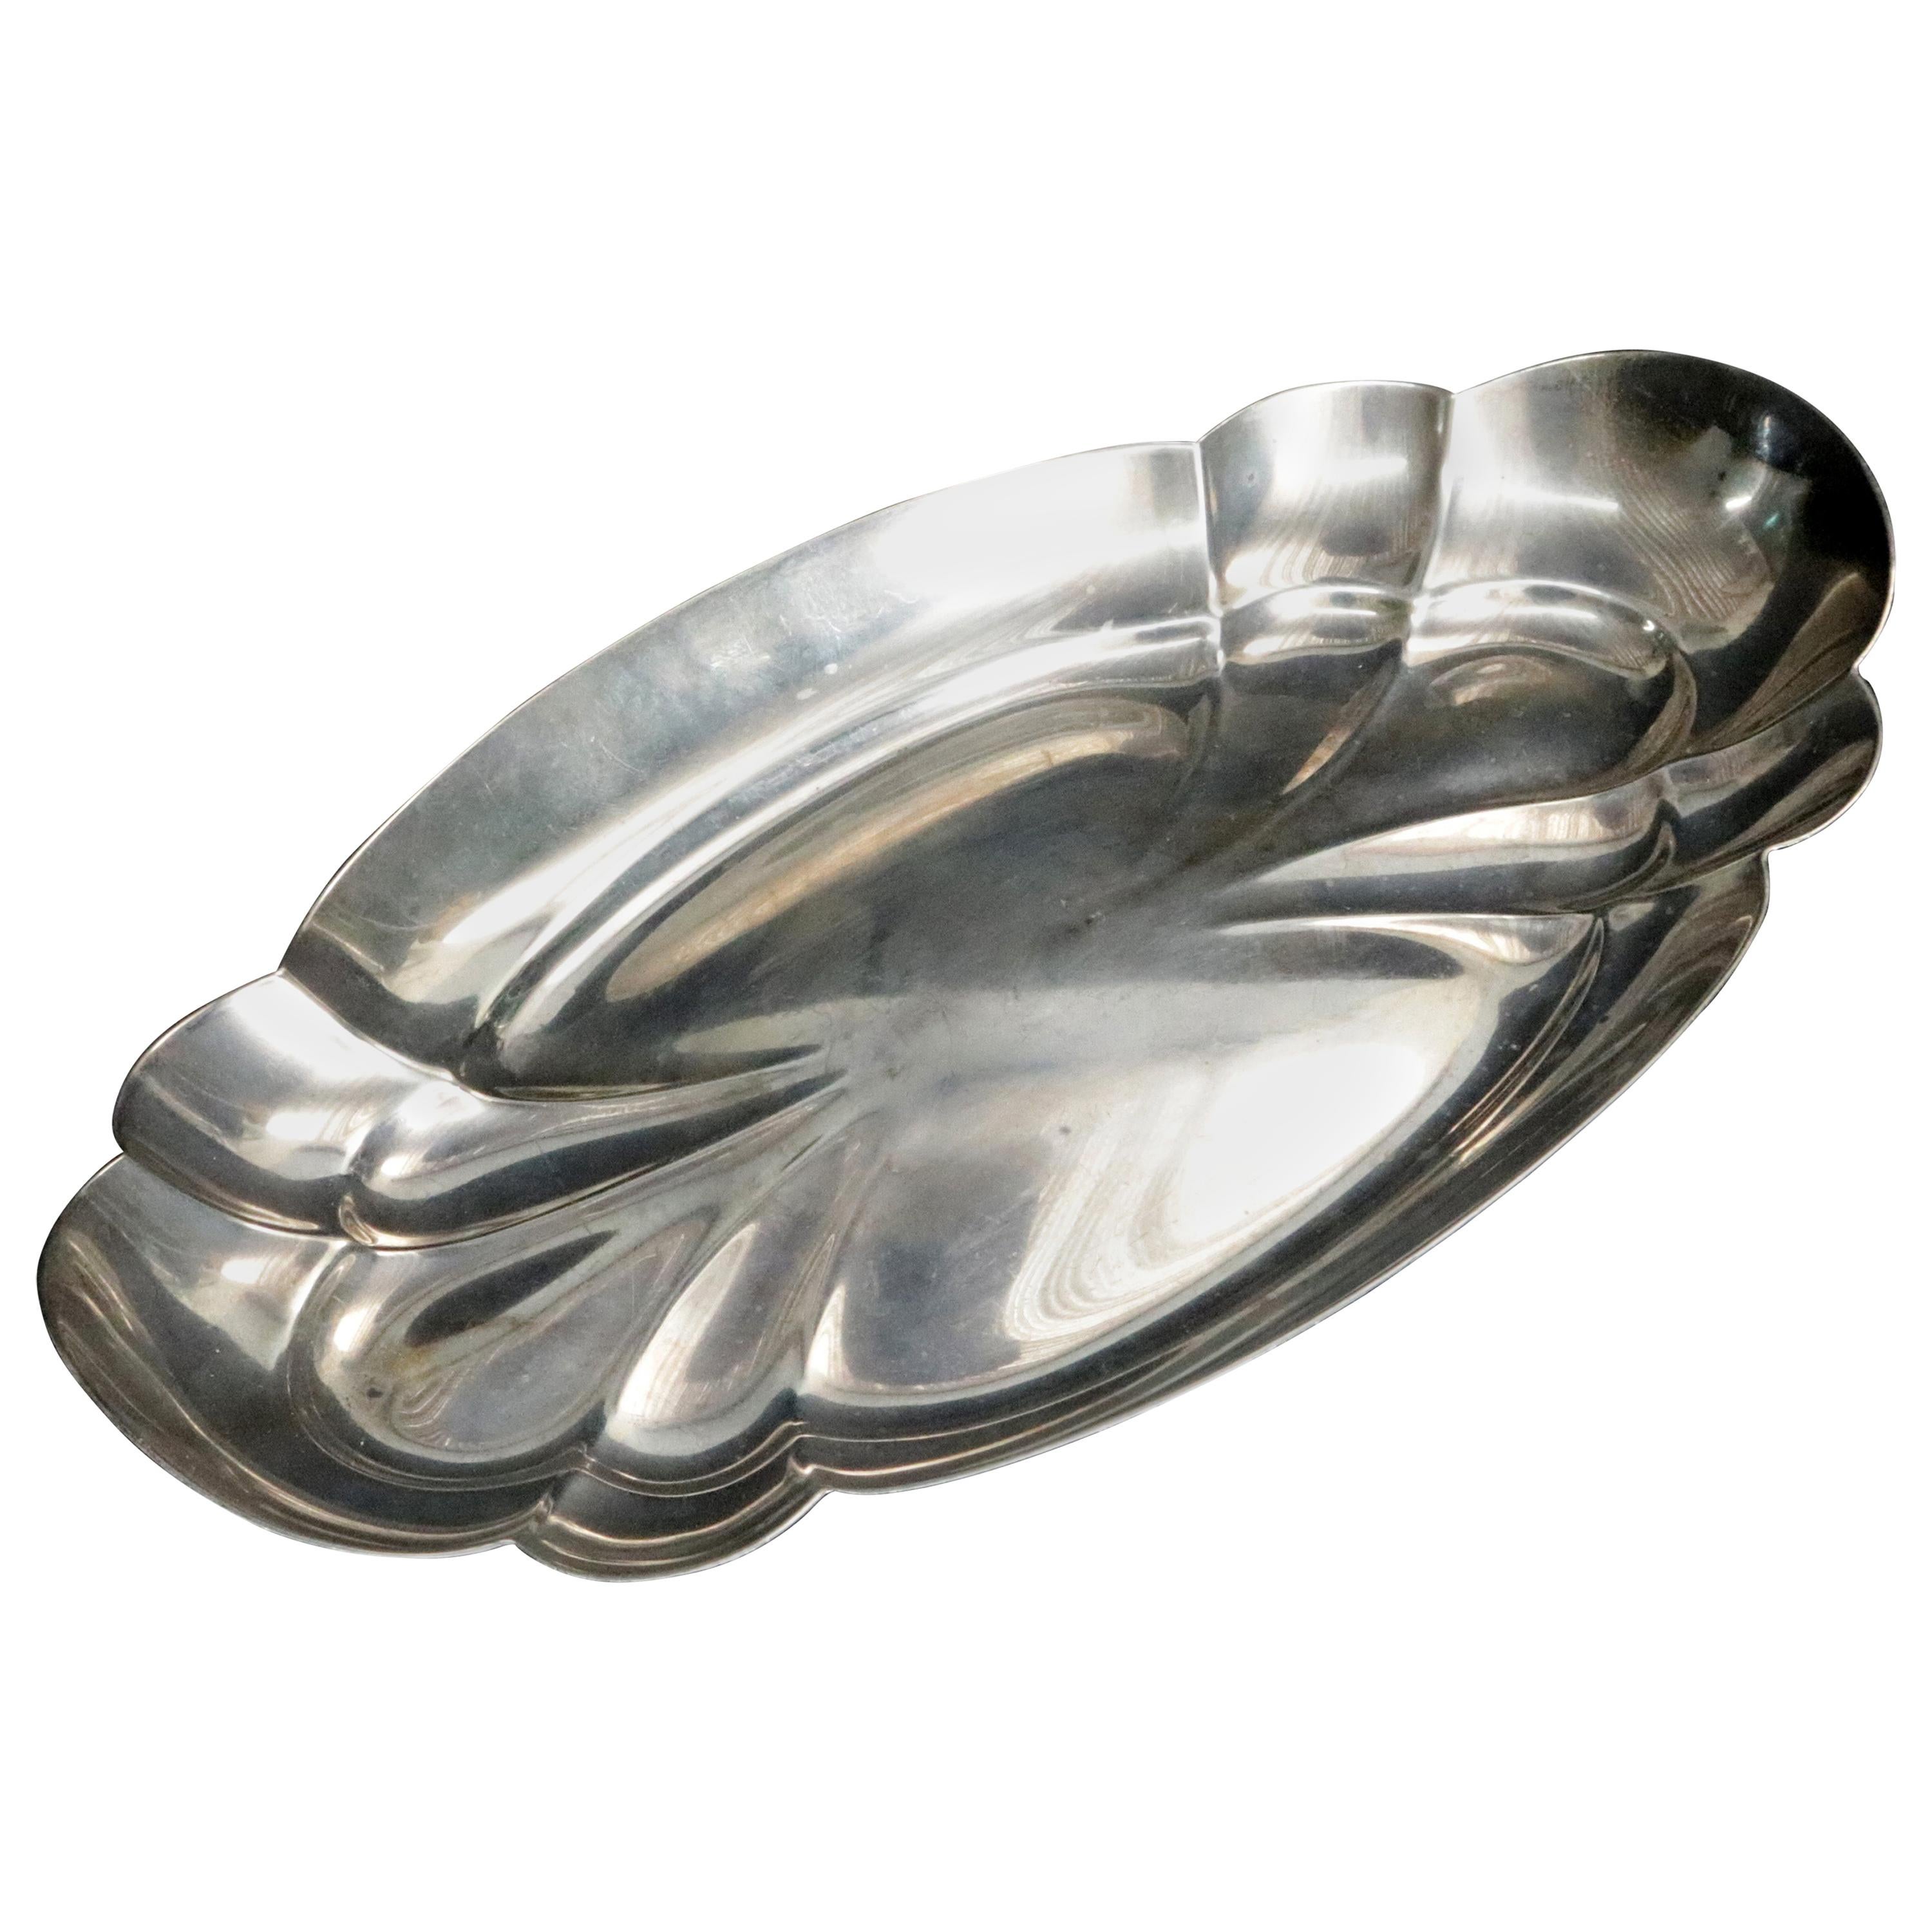 Antique Sterling Silver Bread Tray by Gorham, circa 1920